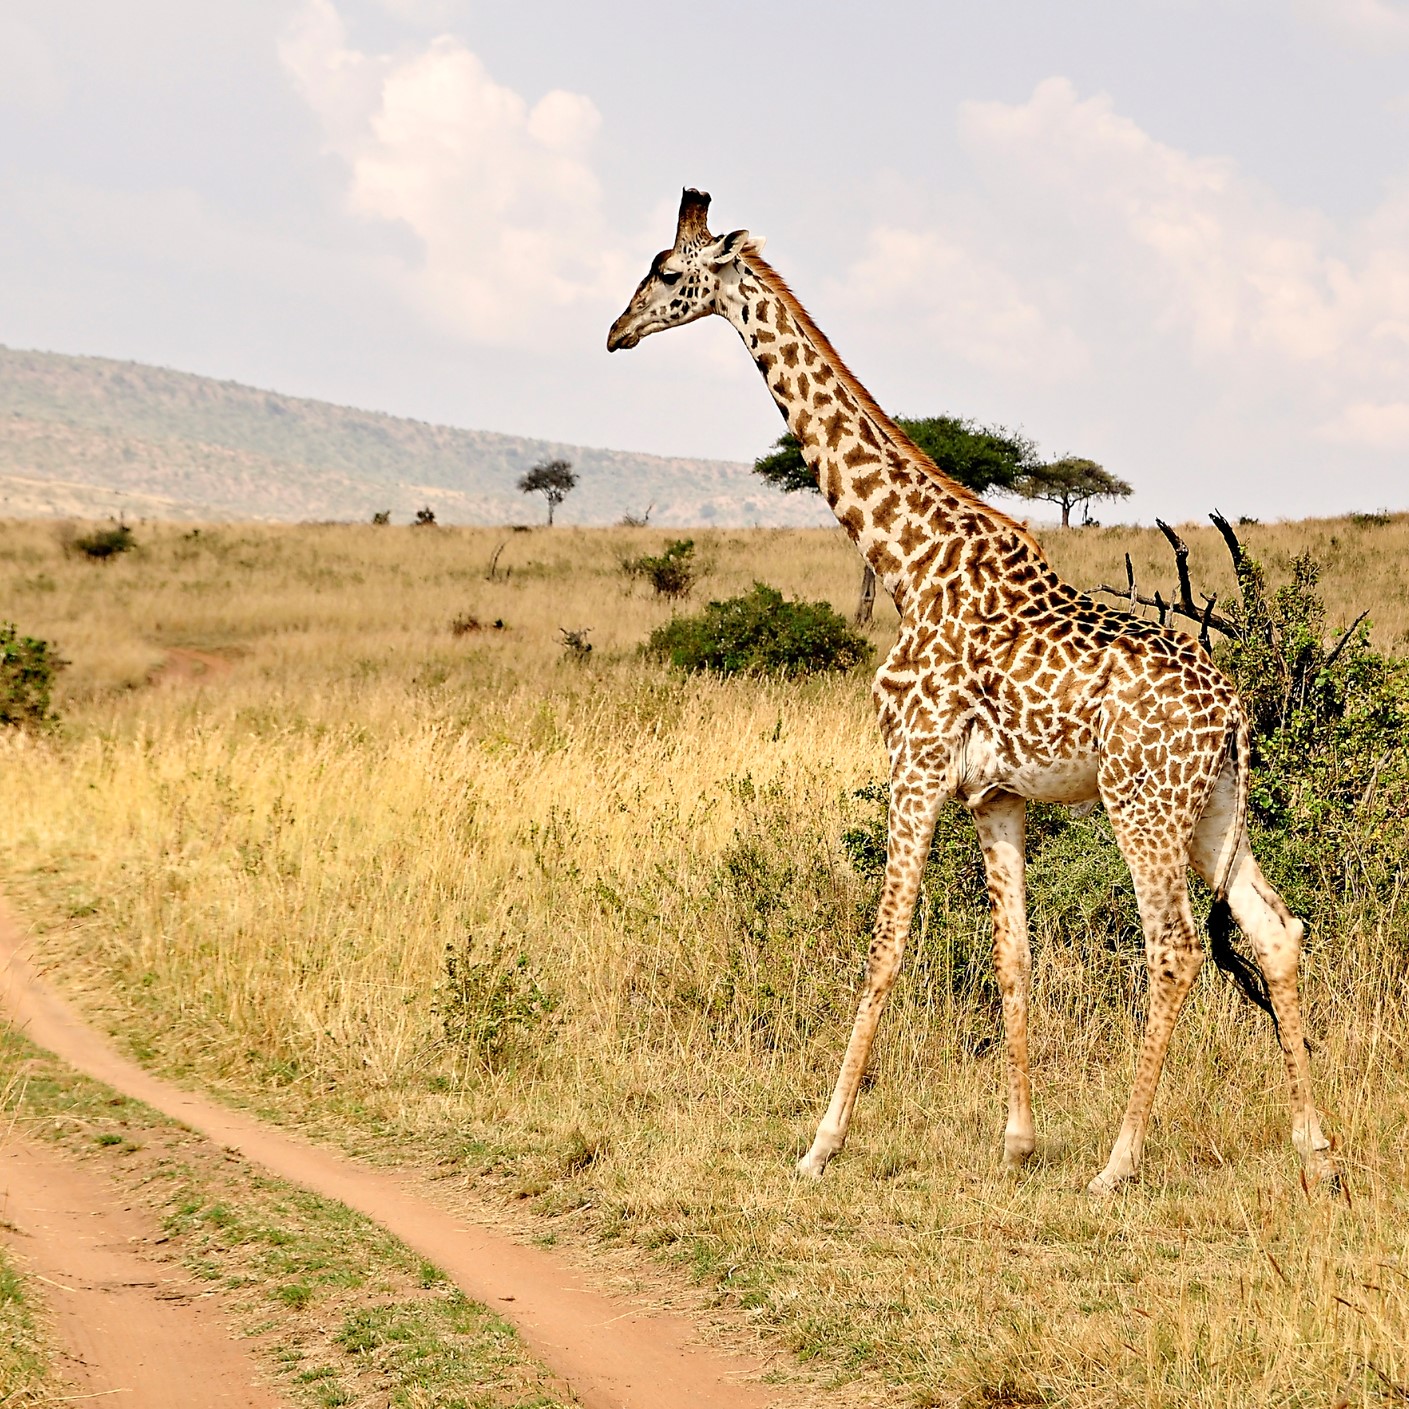 8-night guided tour of South Africa with air & safari from $1,799